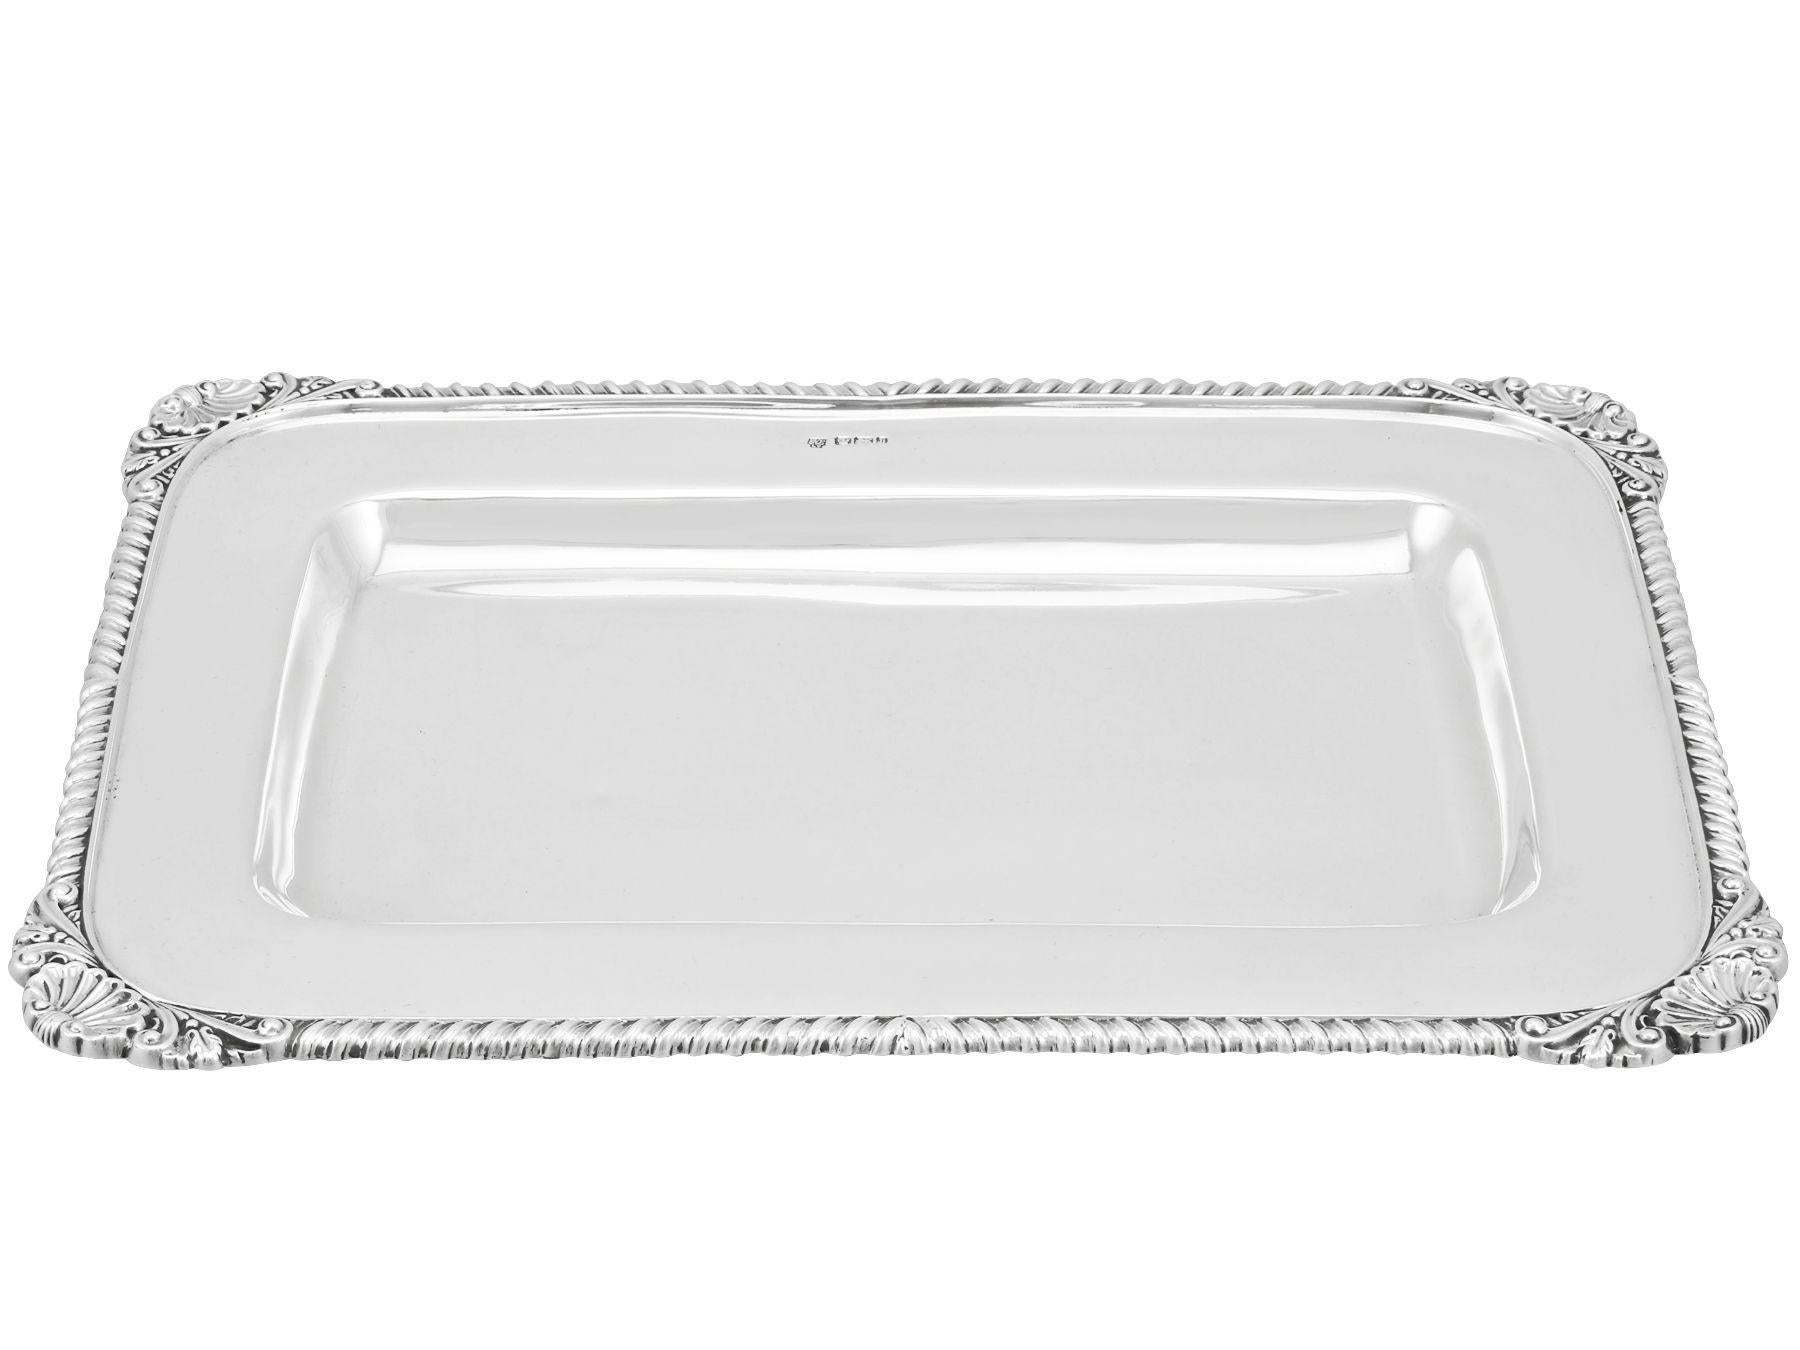 An exceptional, fine and impressive antique Victorian English sterling silver drinks tray; an addition to our silver tray collection

This exceptional Victorian sterling silver tray has a rectangular form with rounded corners.

The surface of